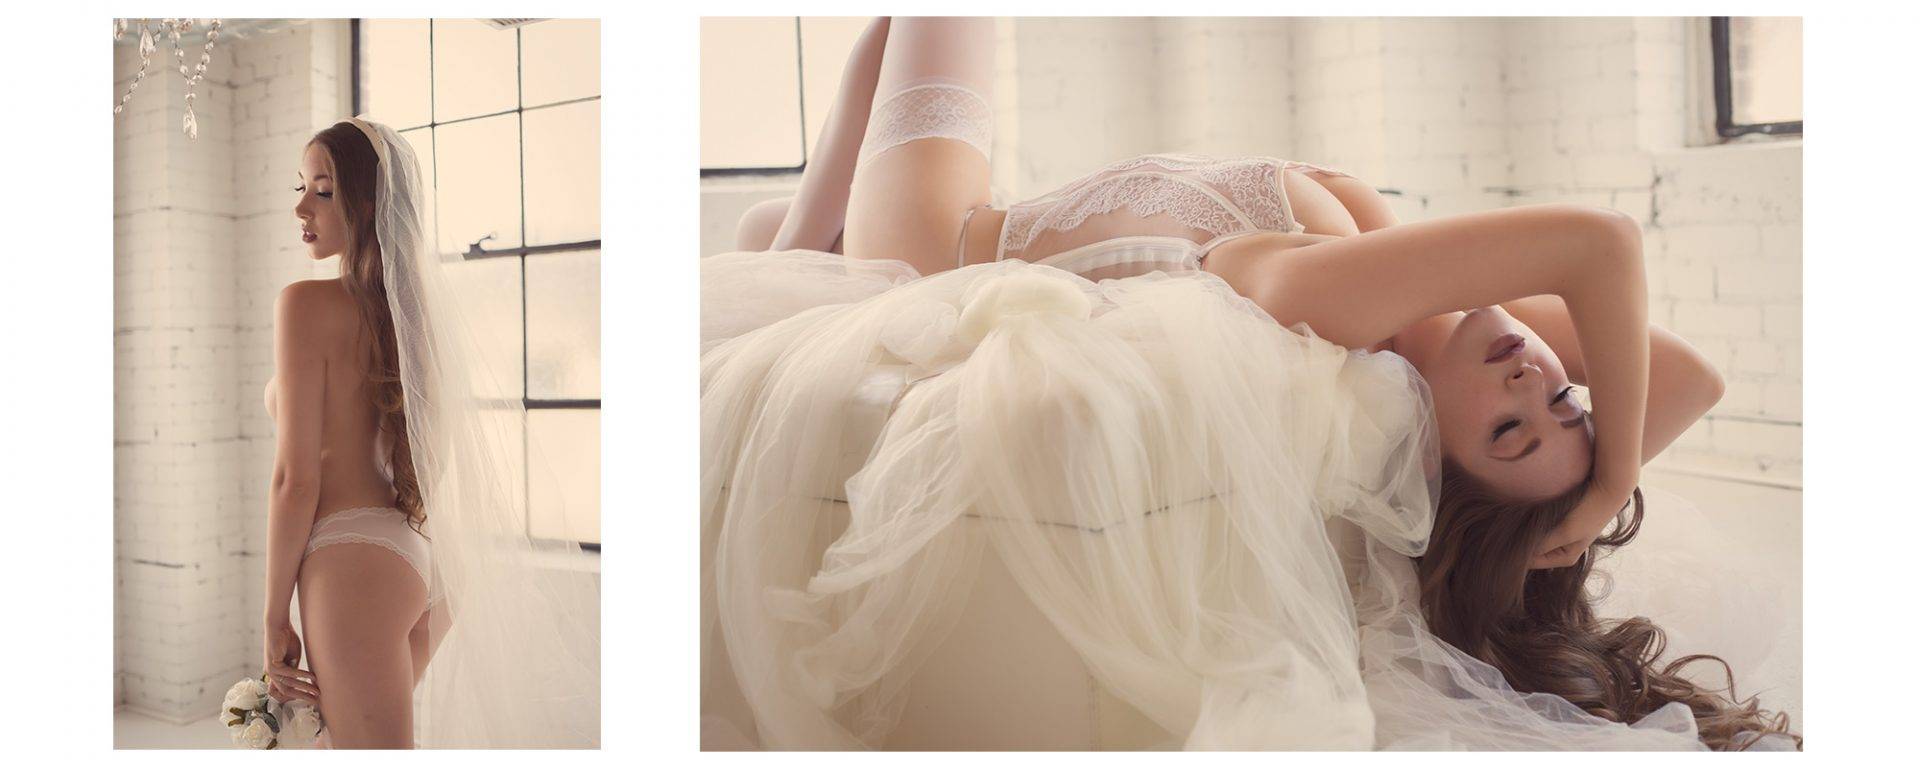 Lady wearing white lingerie and a veil for her bridal boudoir photos.